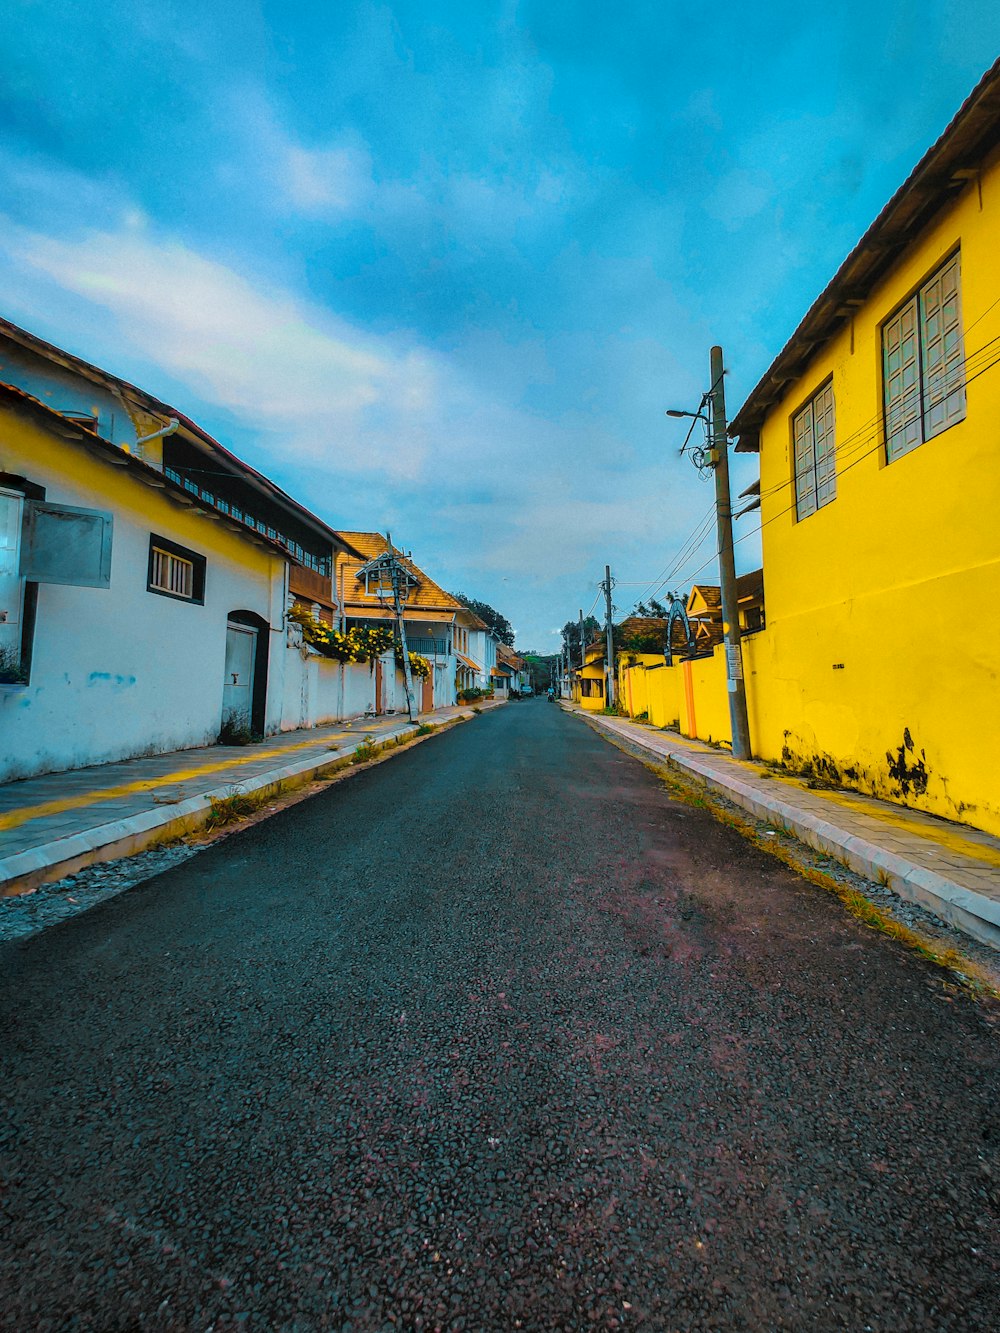 a street with yellow buildings and a blue sky